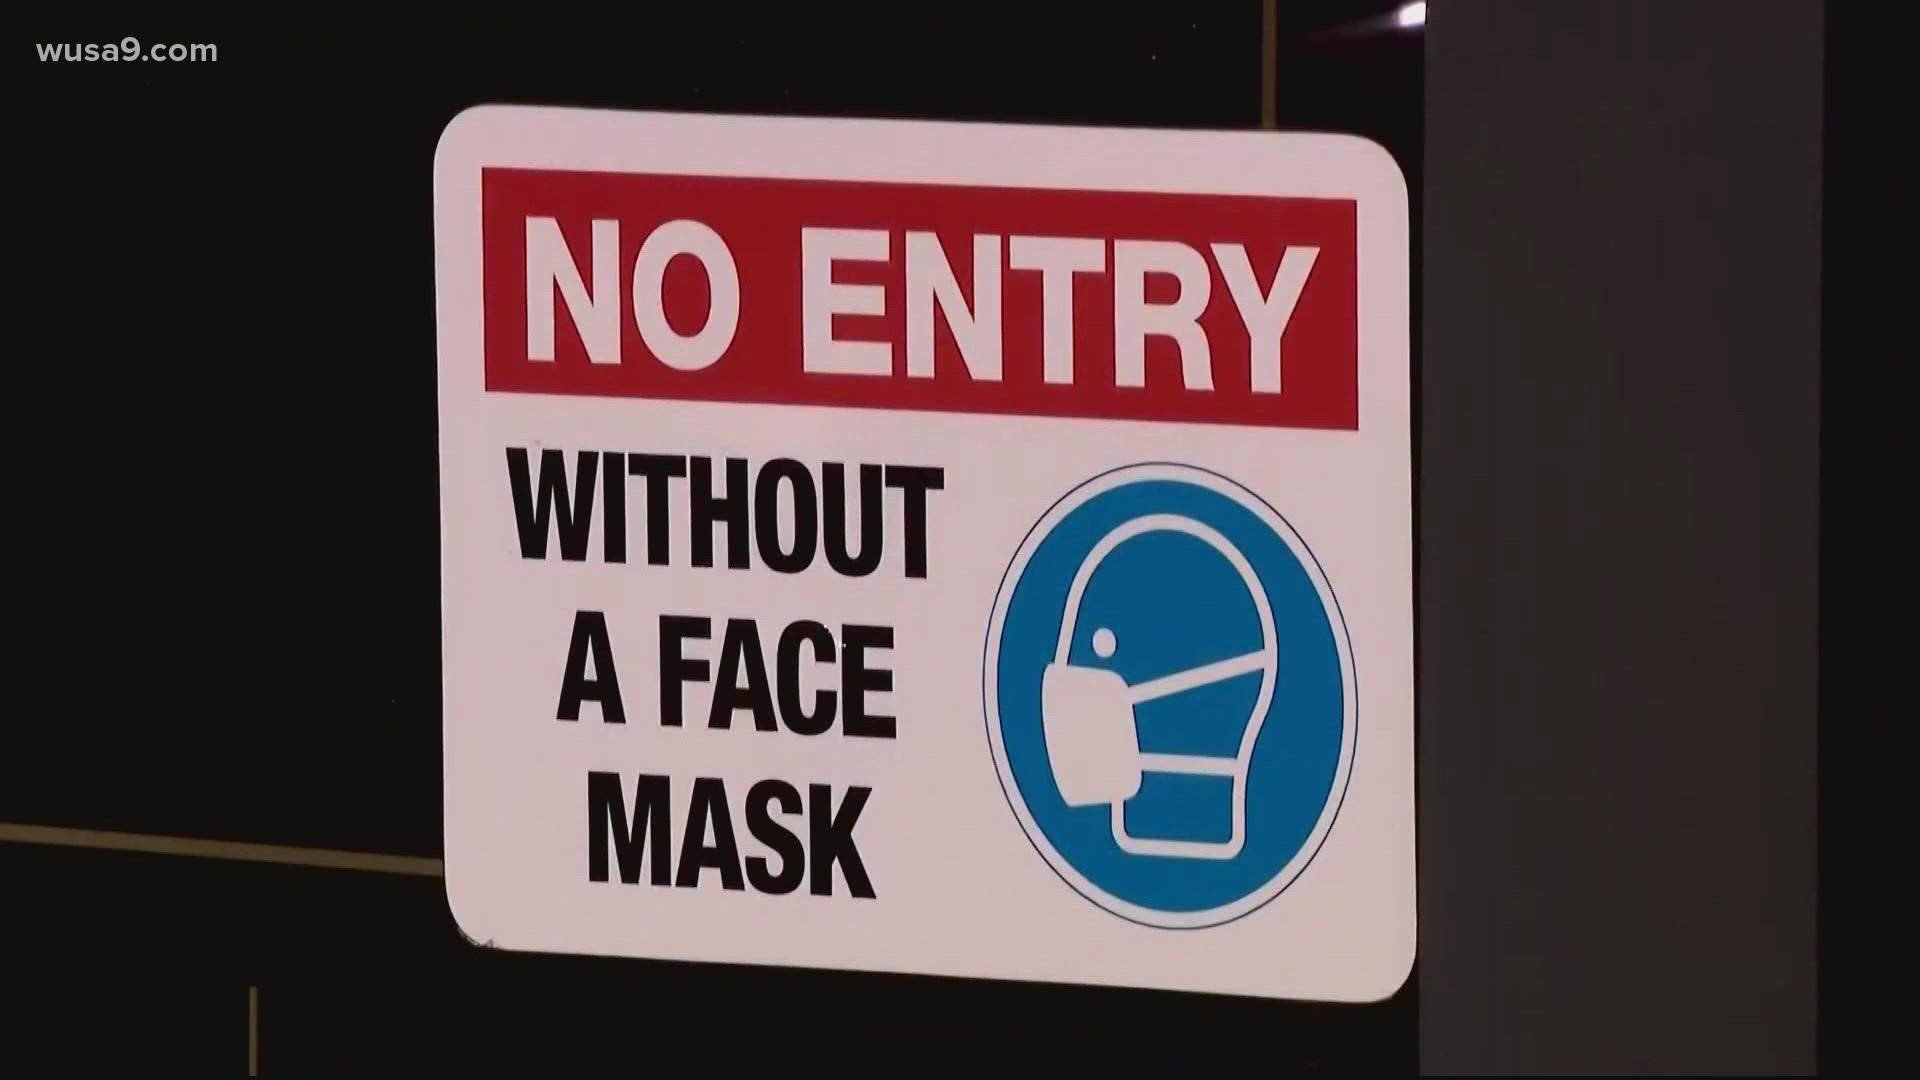 As of now, the countywide indoor mask mandate in Montgomery County is set to expire on February 21.